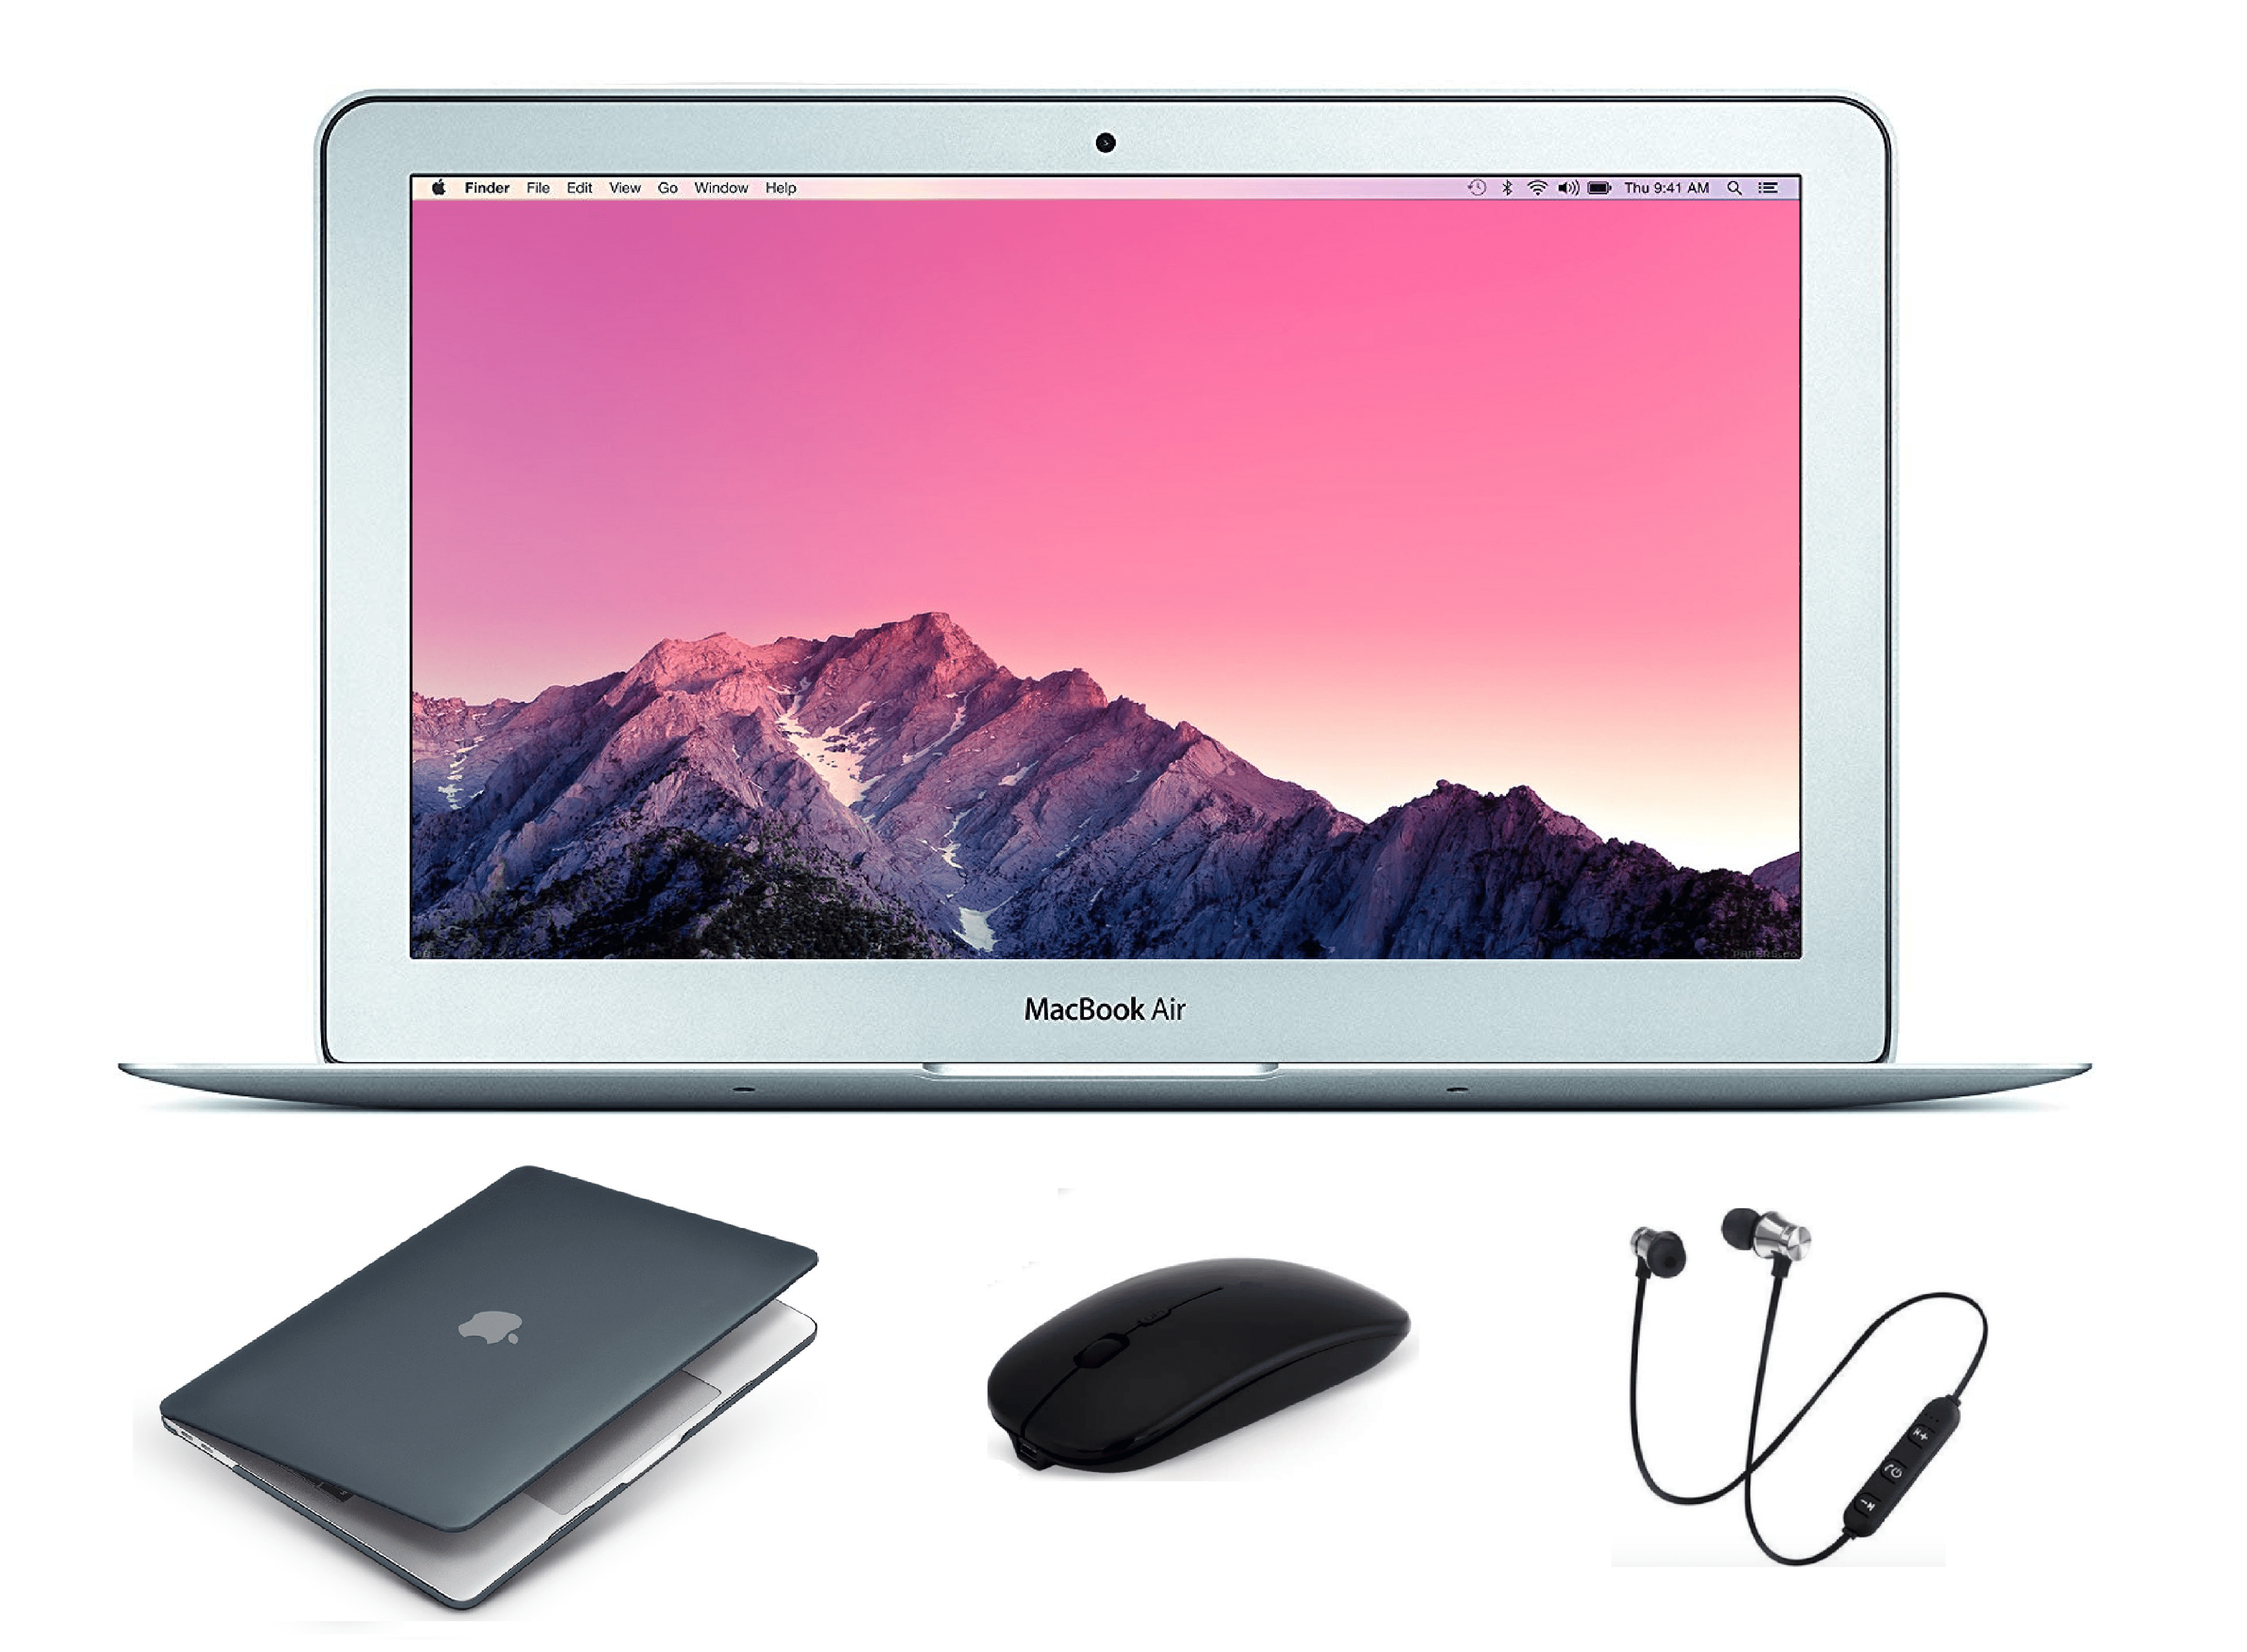 Apple Macbook Air 11.6-inch (Retina Display) Laptop | 4GB RAM, 128GB SSD |  Bundle Includes: Wireless Headset, Bluetooth Mouse, Generic Case & 1 Year  